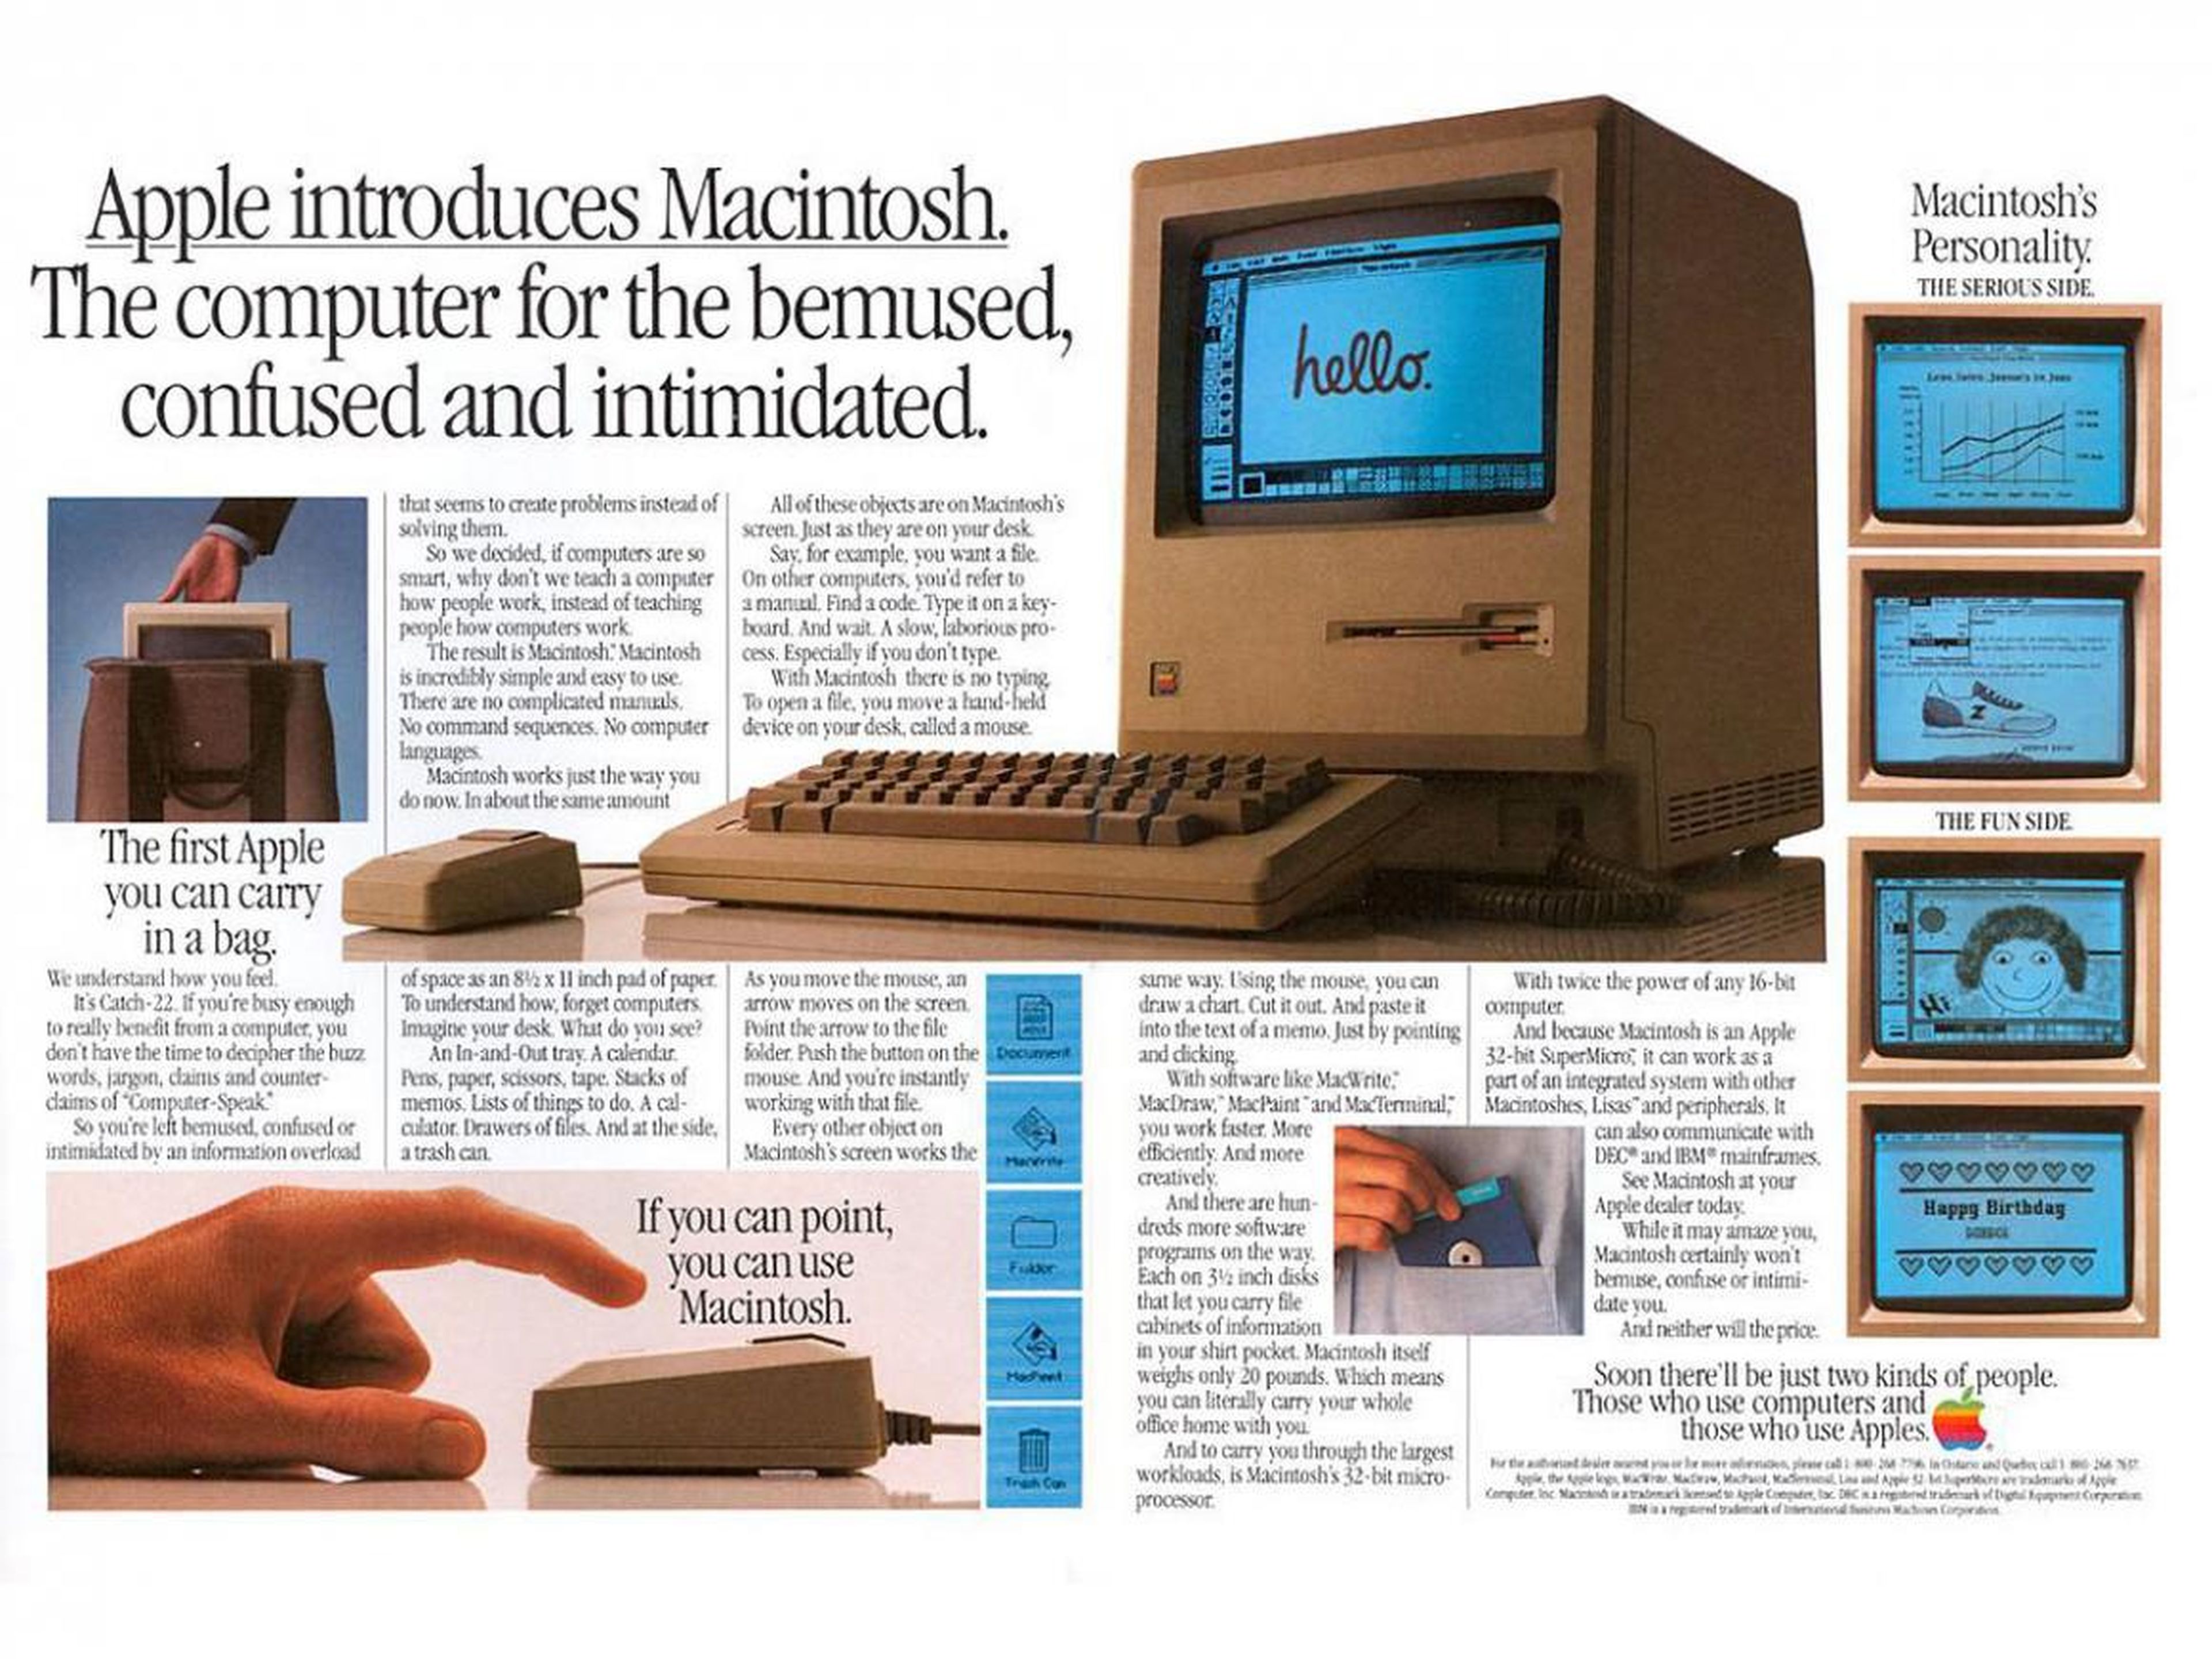 A lot of Apple's marketing used to focus on people who hadn't realized the potential of computers yet, or who thought they were too difficult to use.